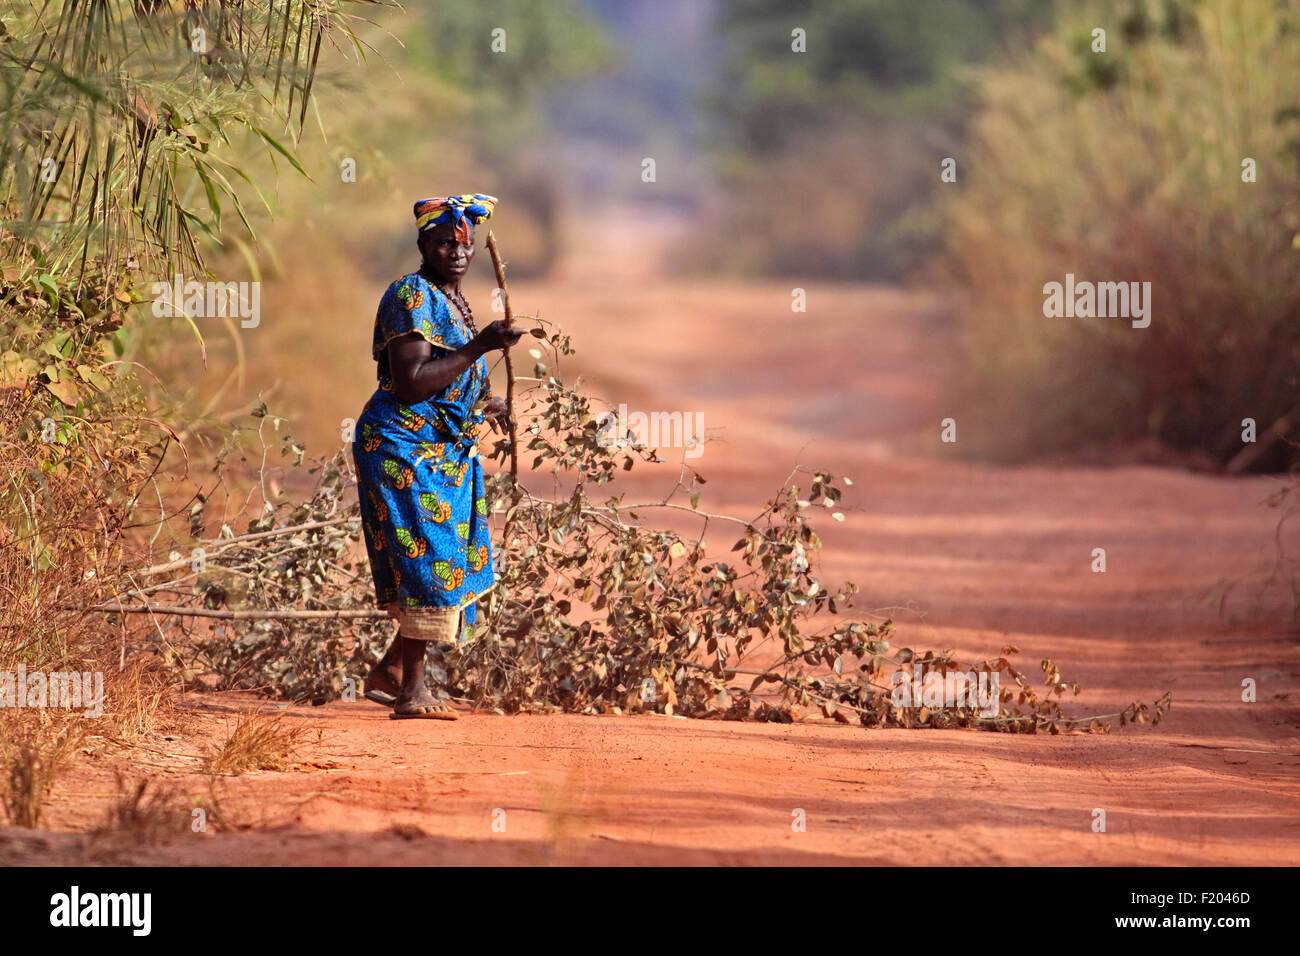 Gambia, Woman collecting branches on dirt road. Stock Photo